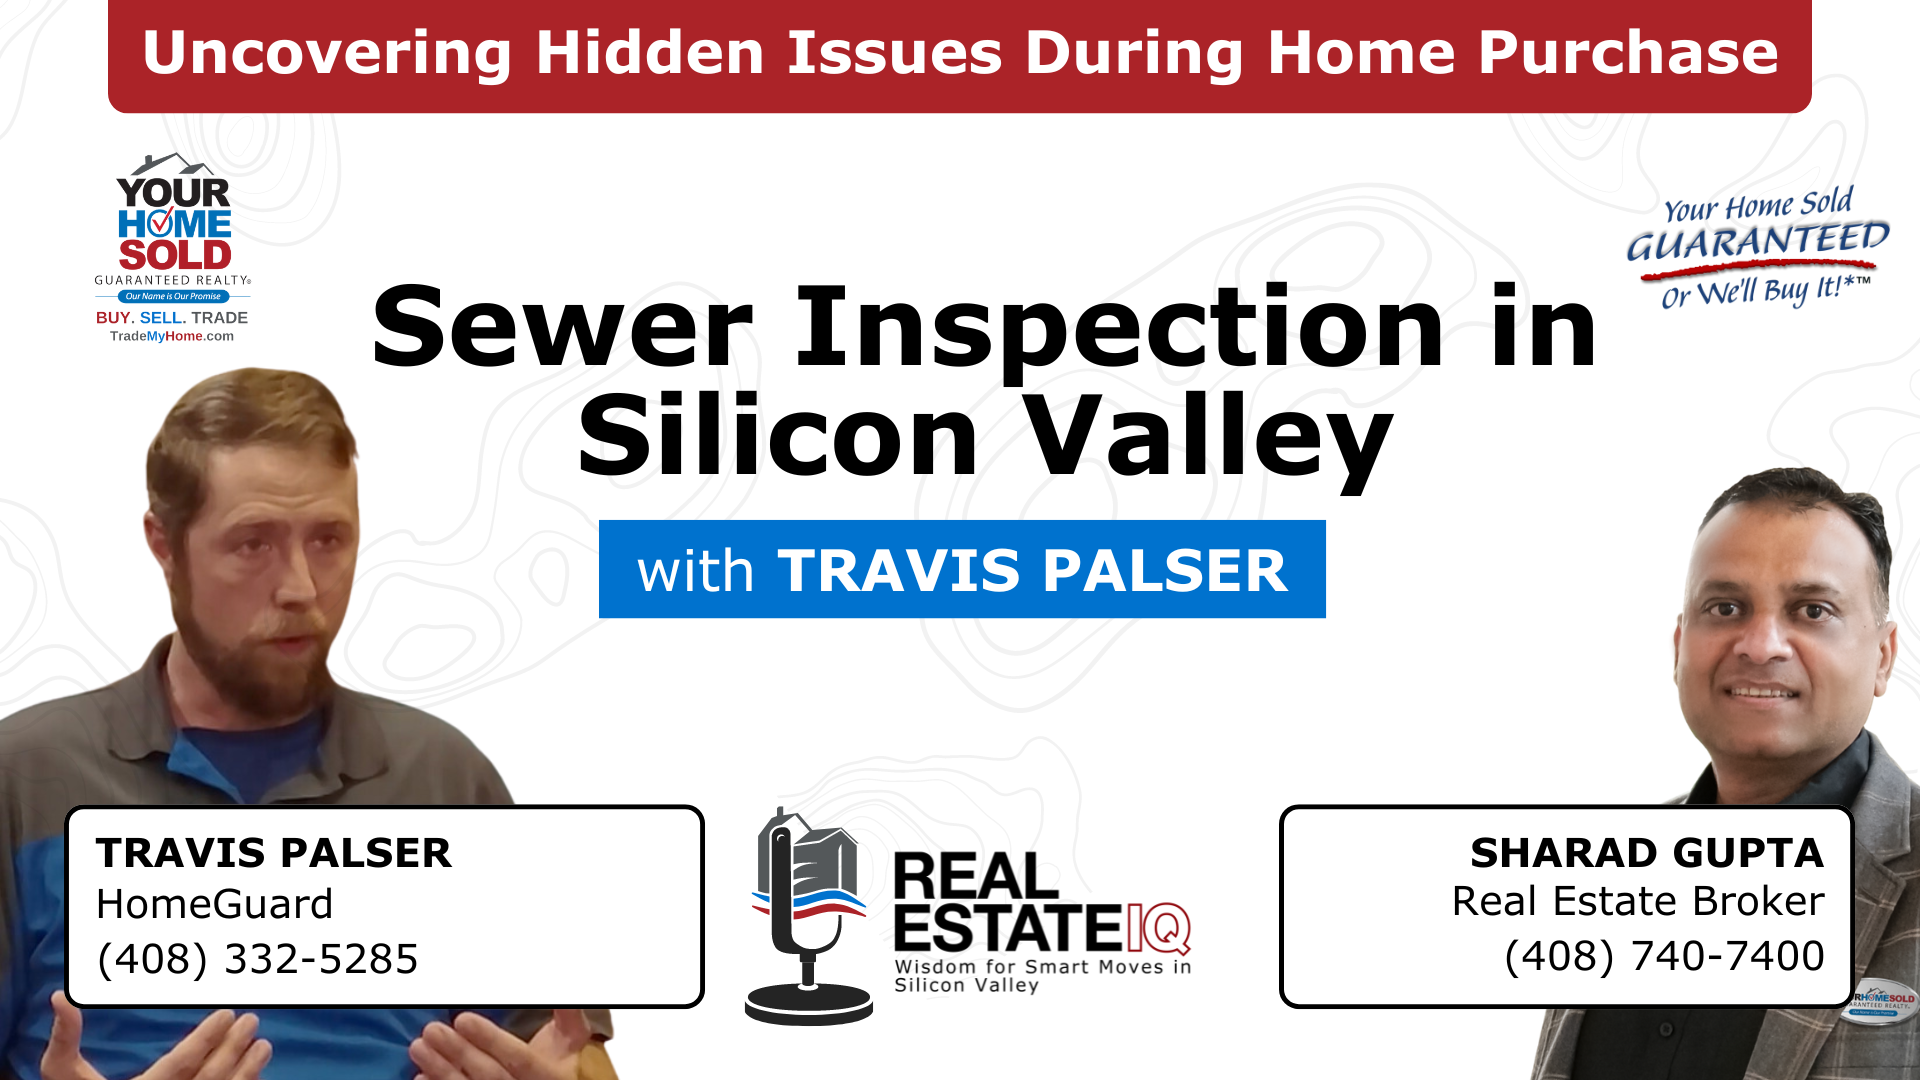 Sewer Inspections: Uncovering Hidden Issues During Home Purchase in Silicon Valley